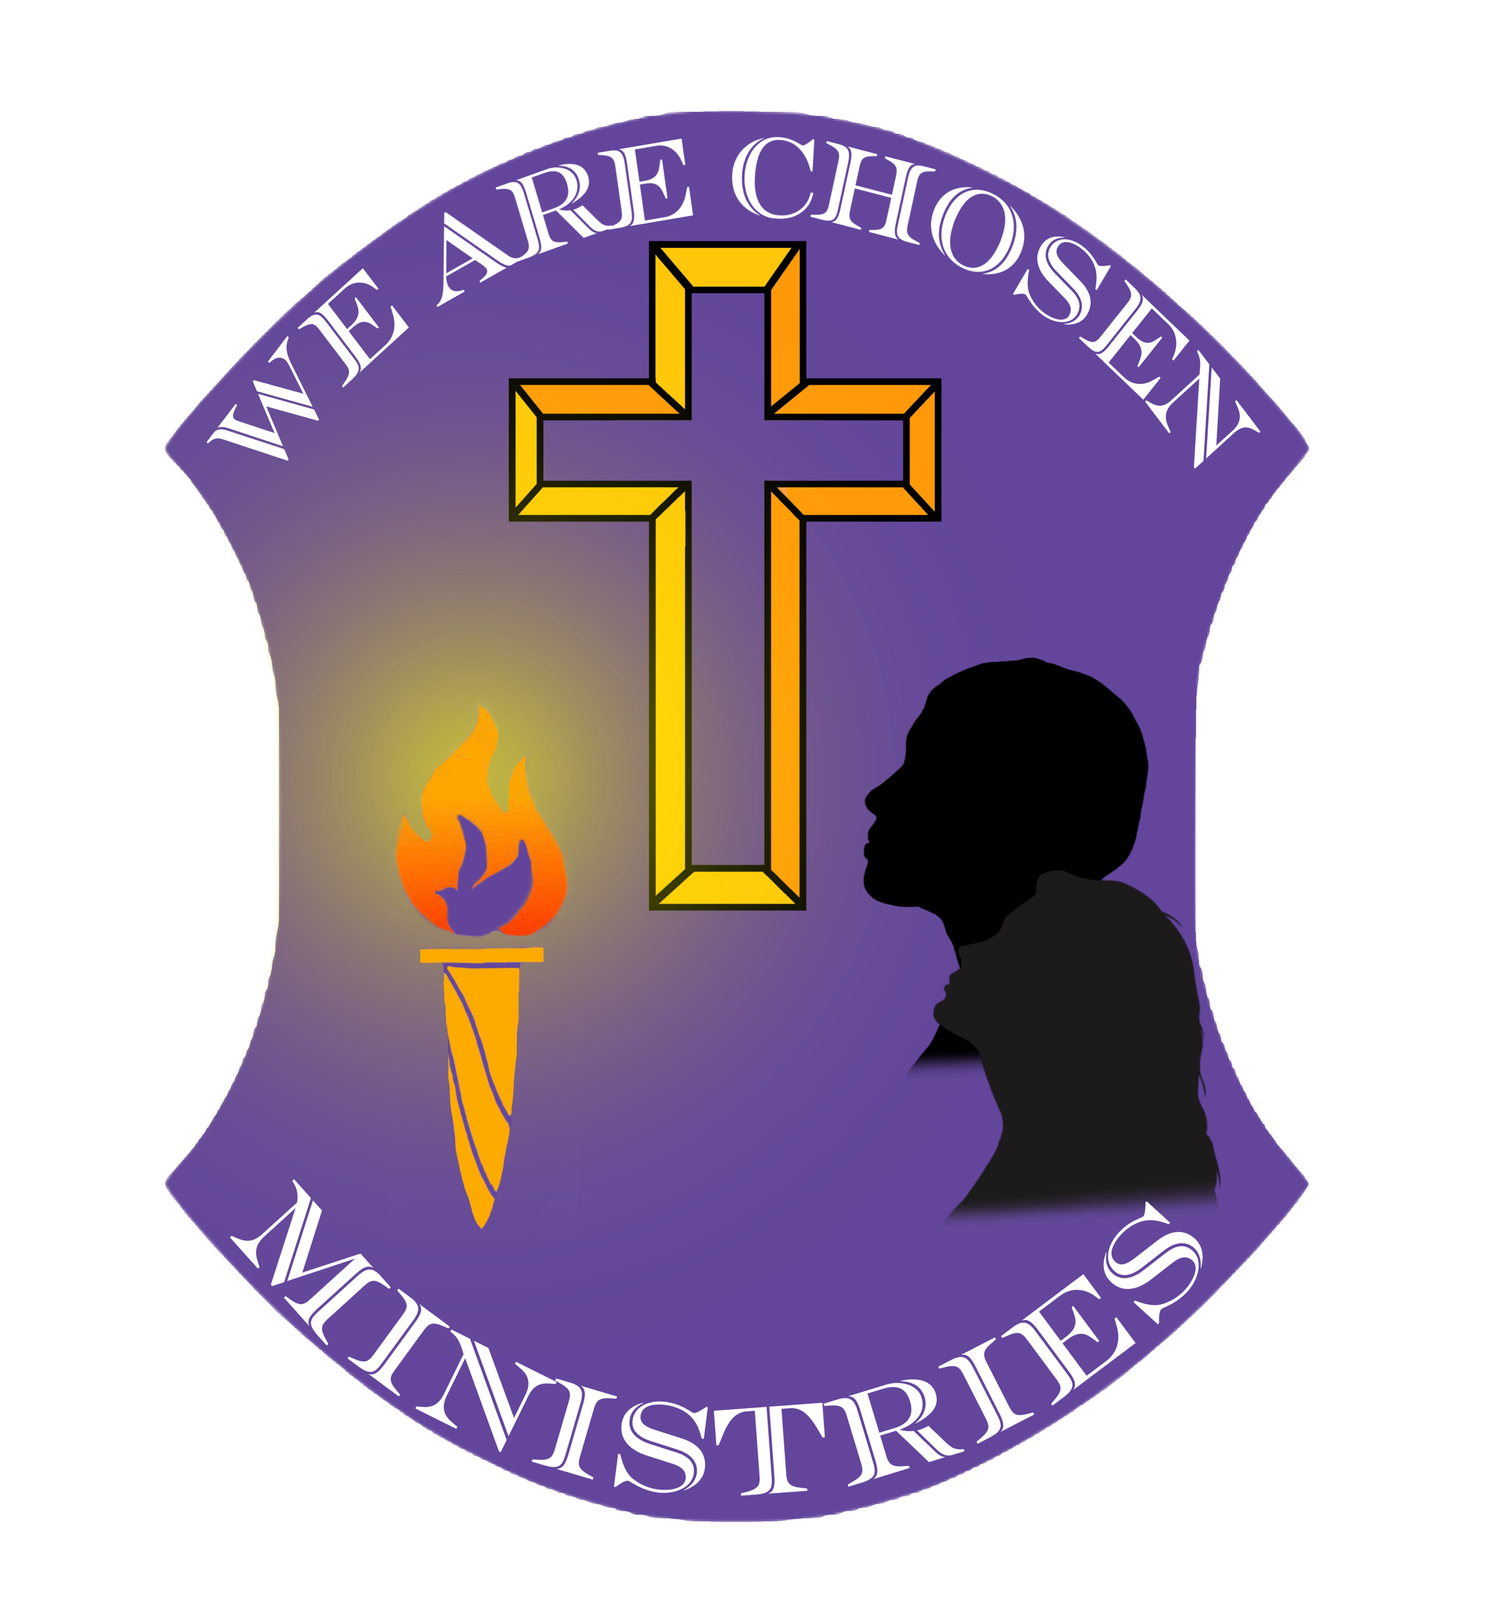 We Are Chosen Ministries